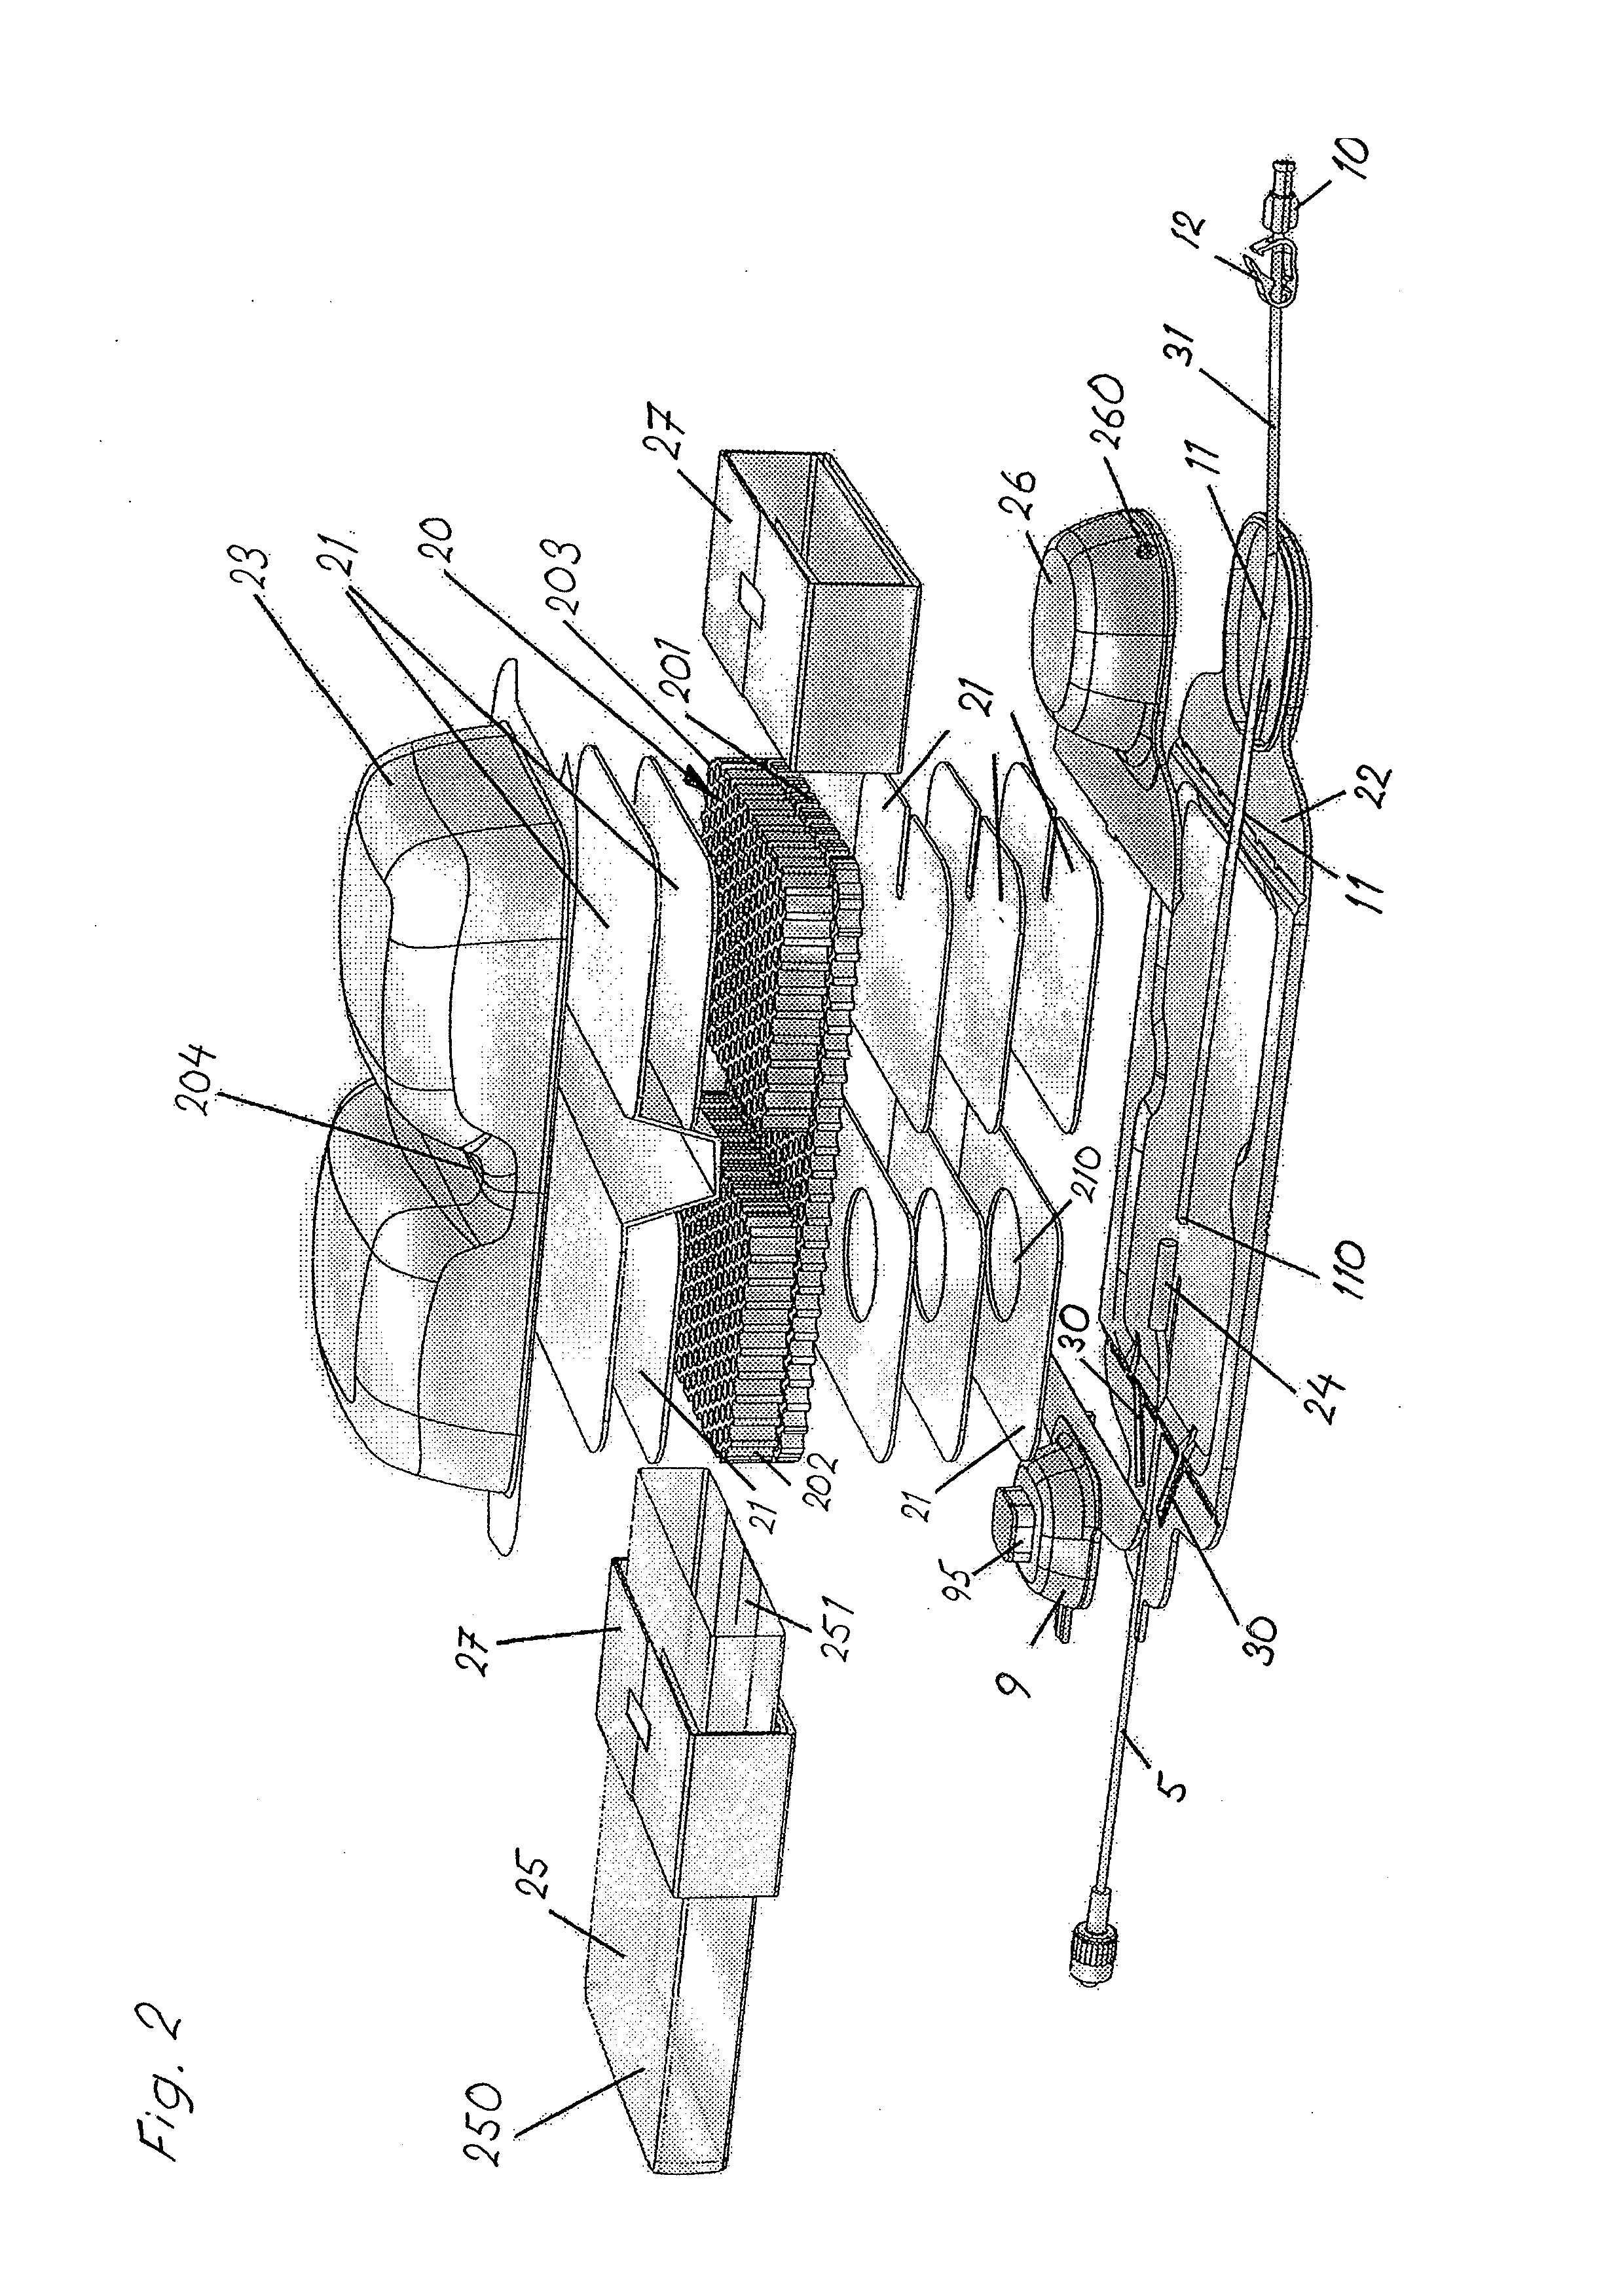 Device for tratment of wound using reduced pressure